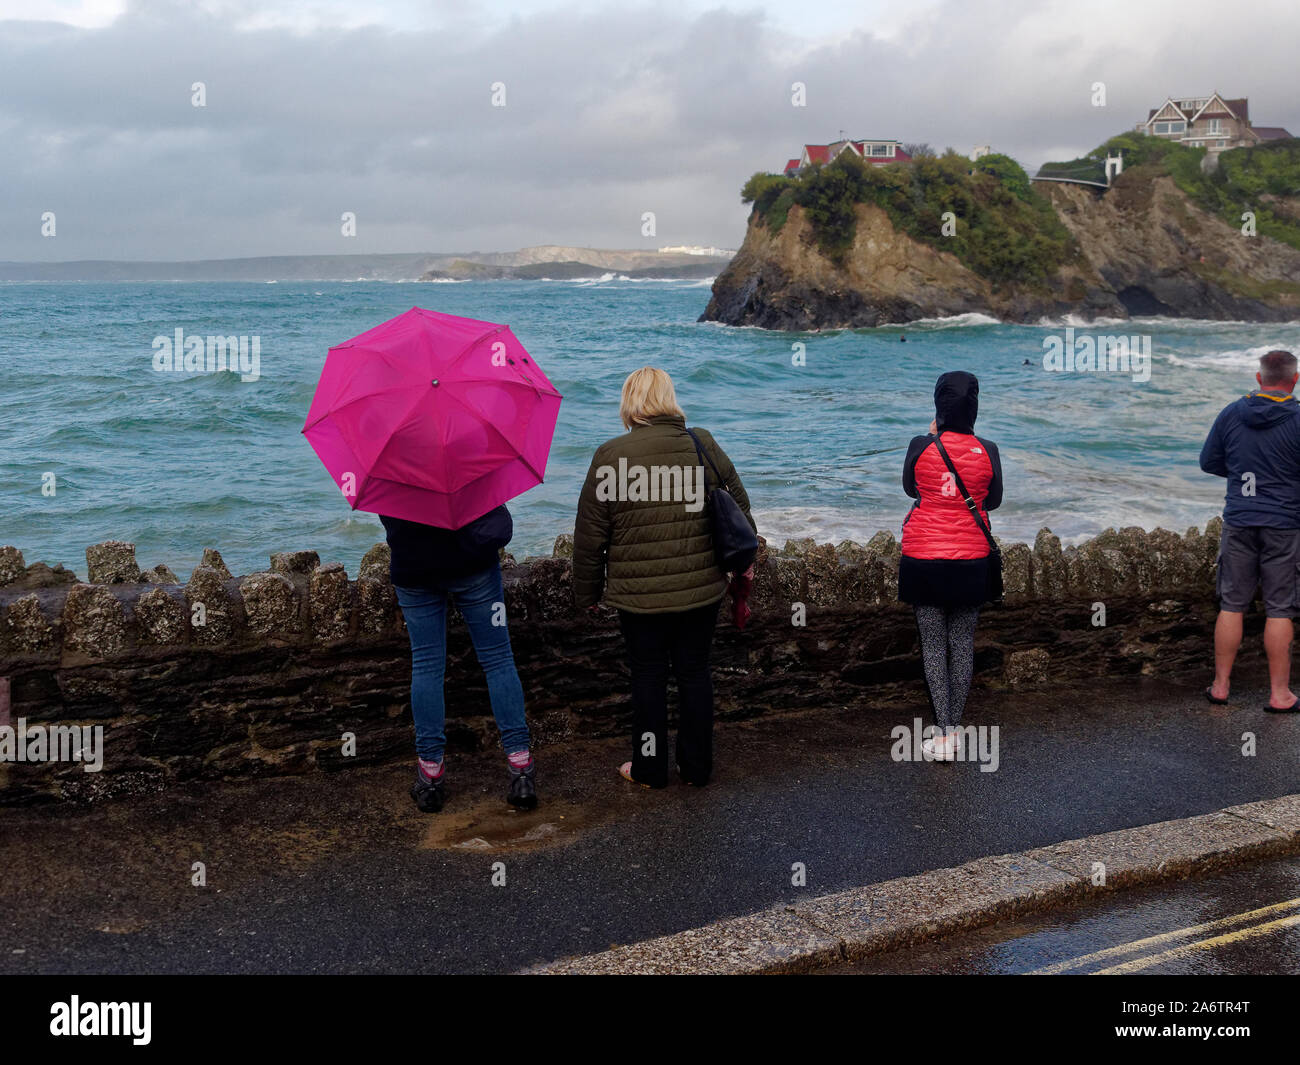 Newquay, Cornwall, England, 27th September 2019. UK weather: Spring tides and global sea level rises inundate coastal resorts and involve RNLI. Stock Photo